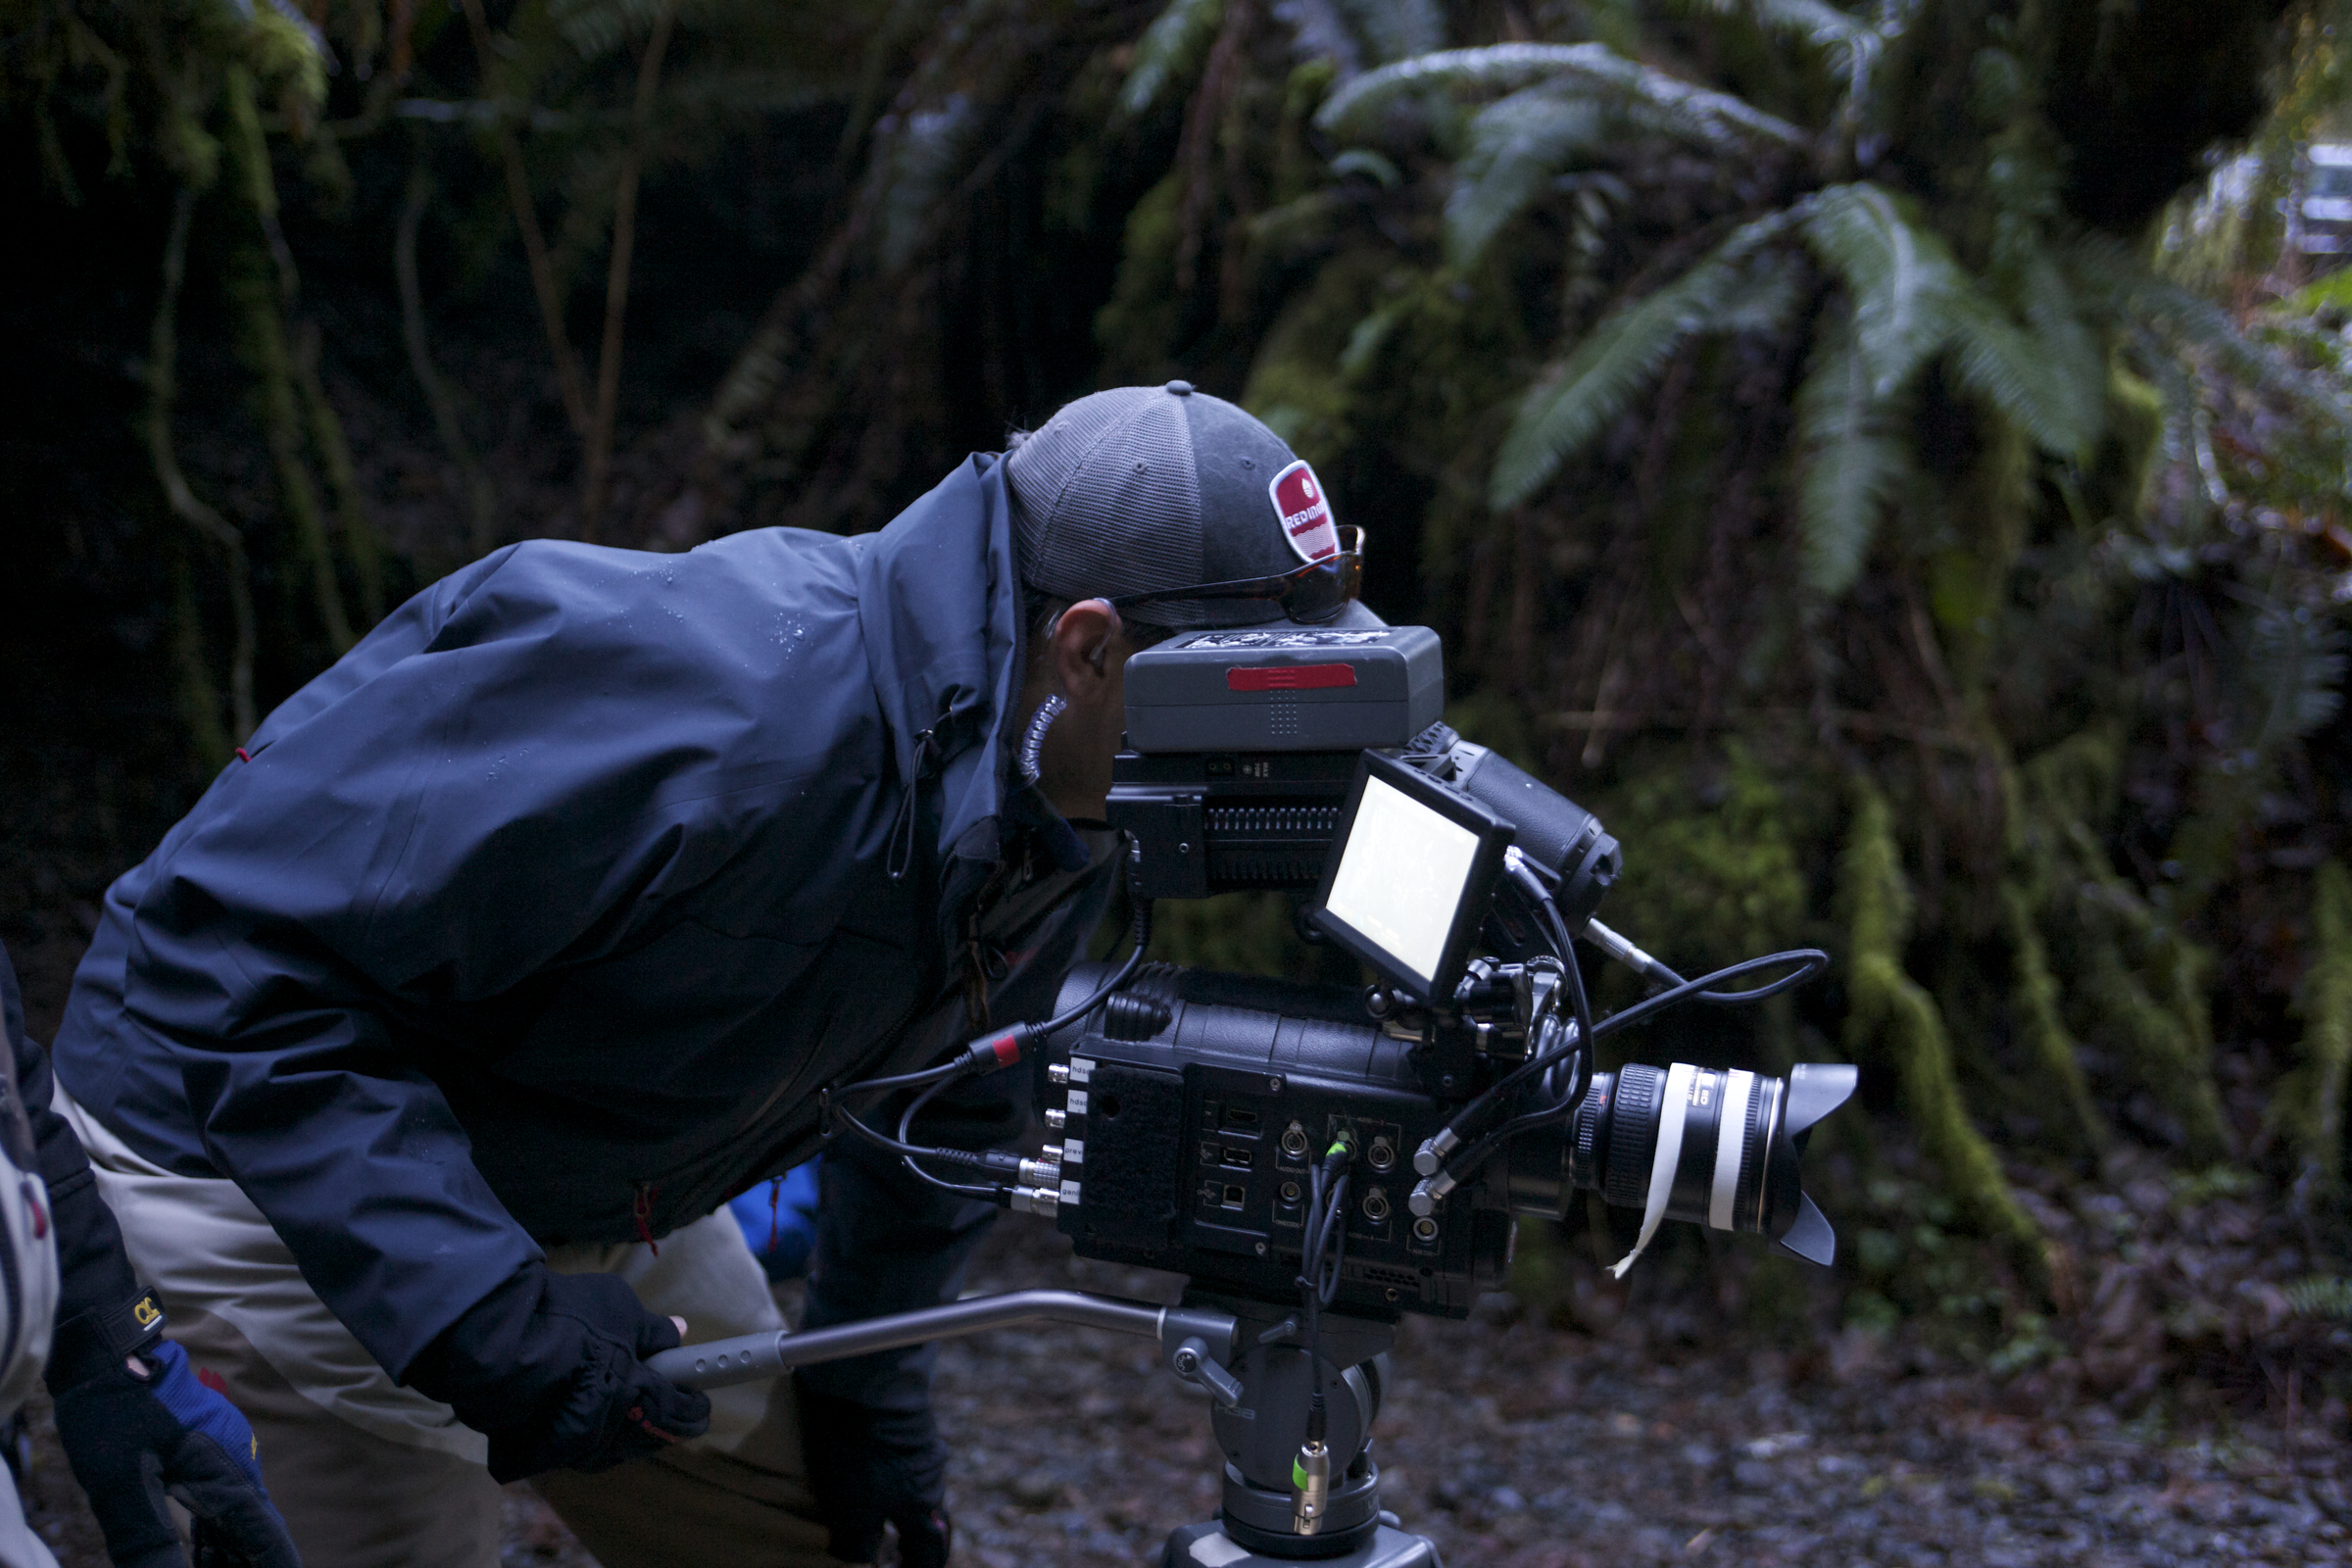 Director Scott A. Capestany on the RED for his TV Series THE RAINFOREST